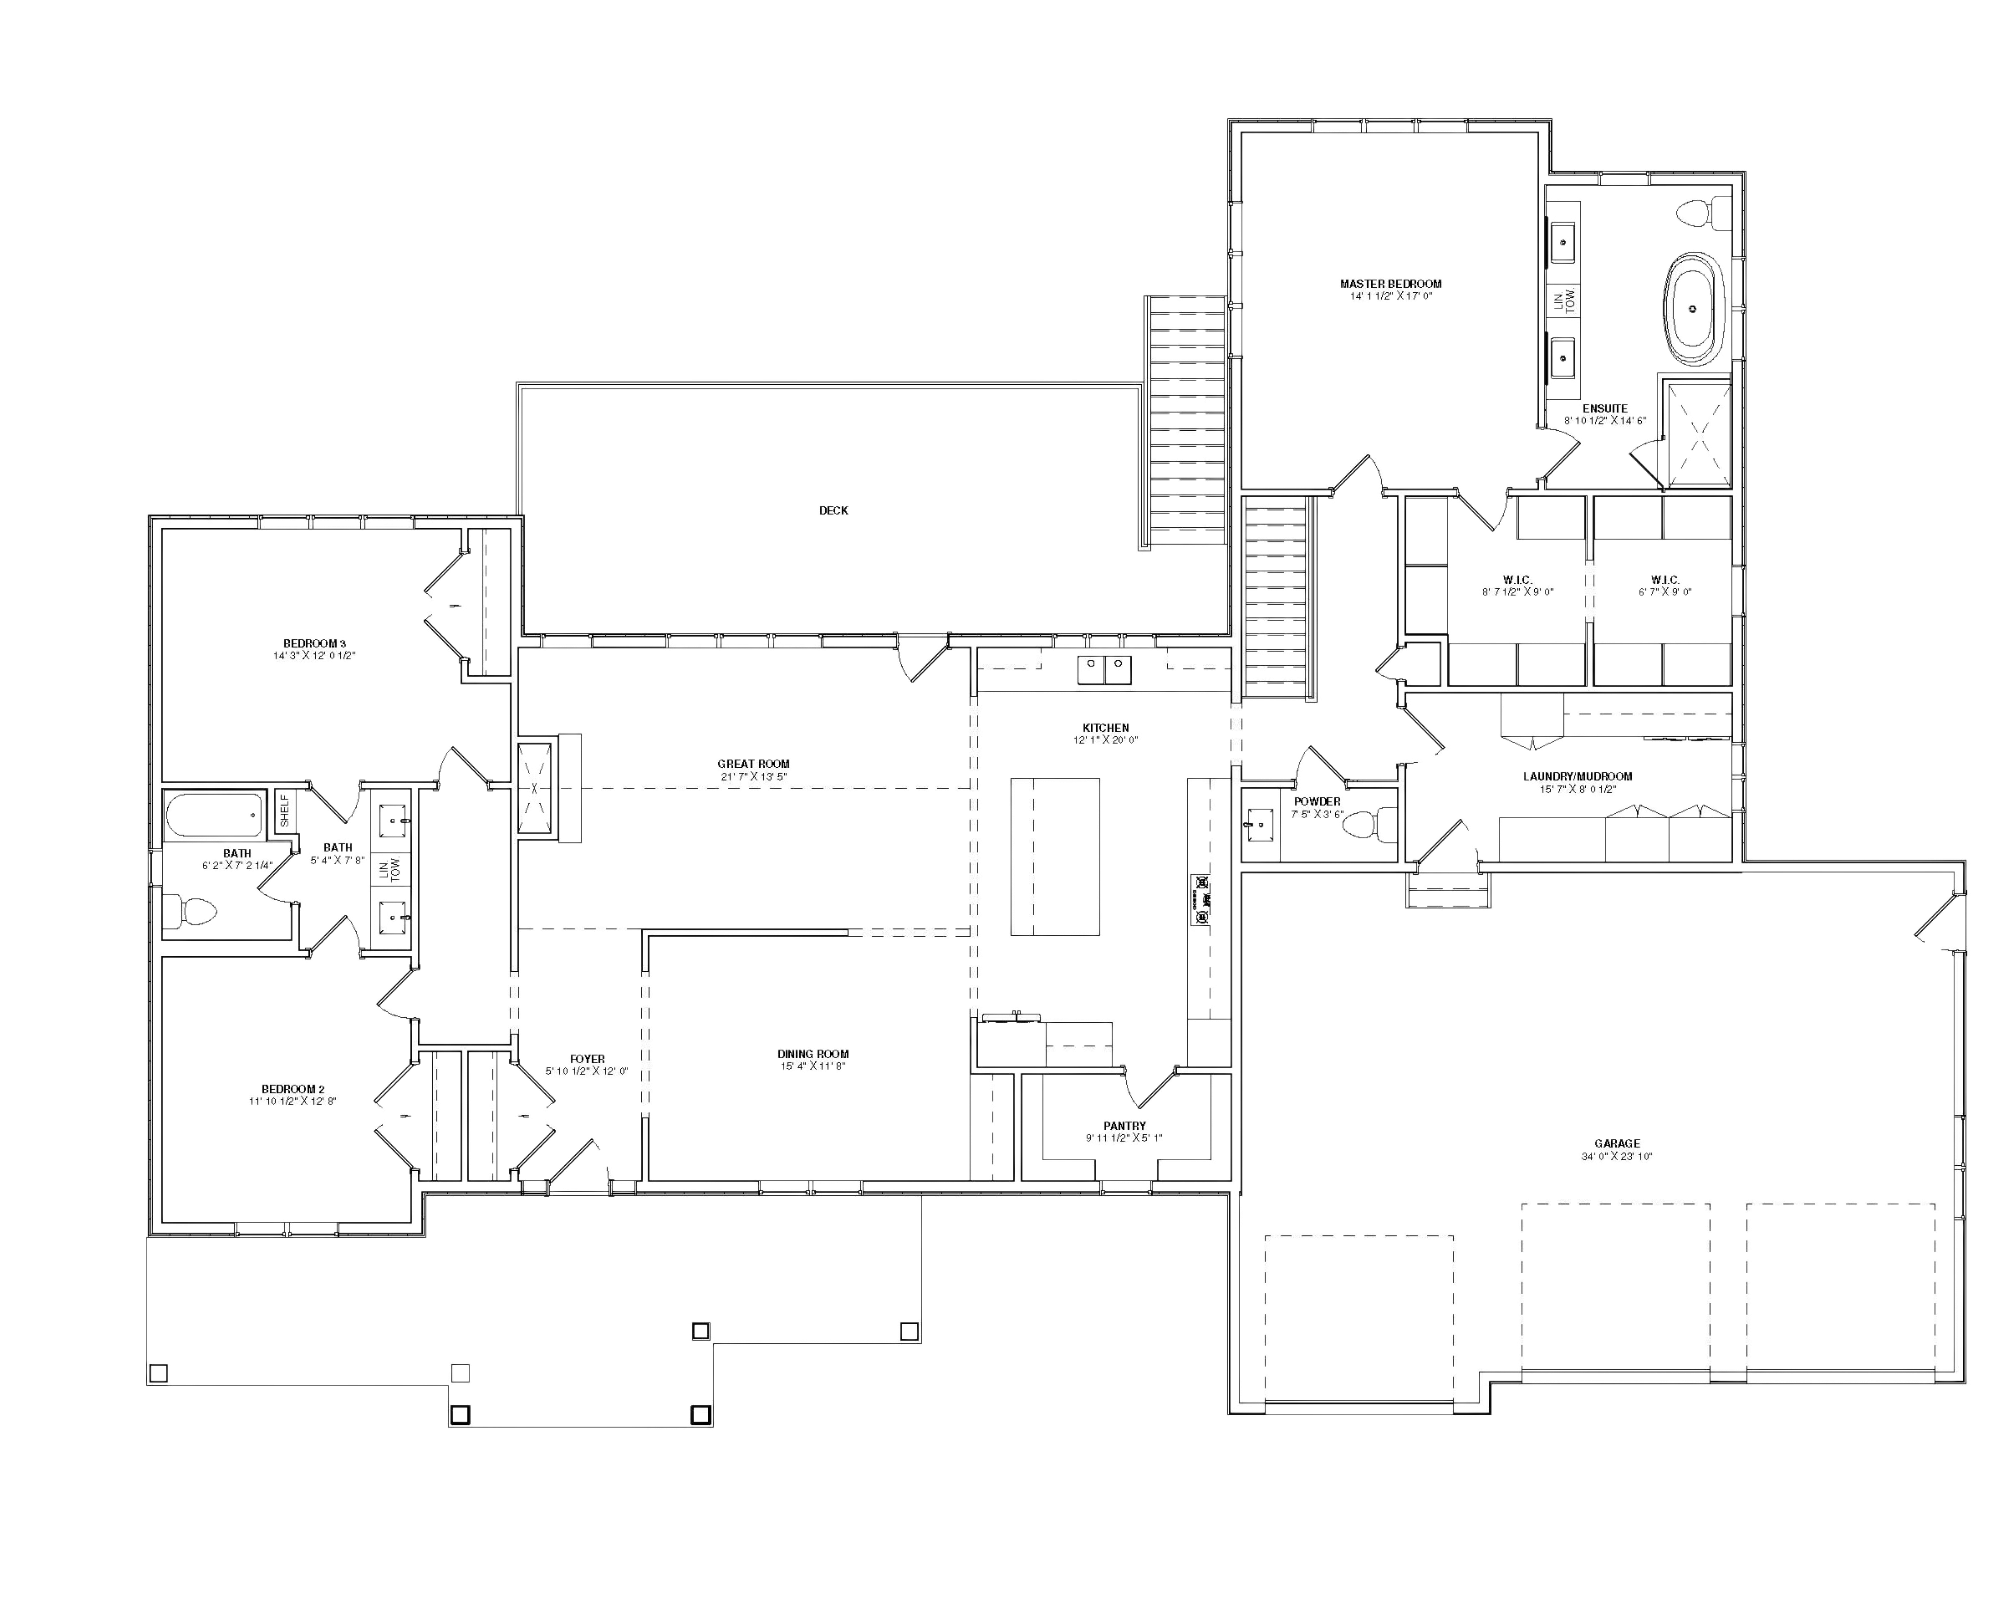 Preliminary drawings of a custom home. Shows rooms